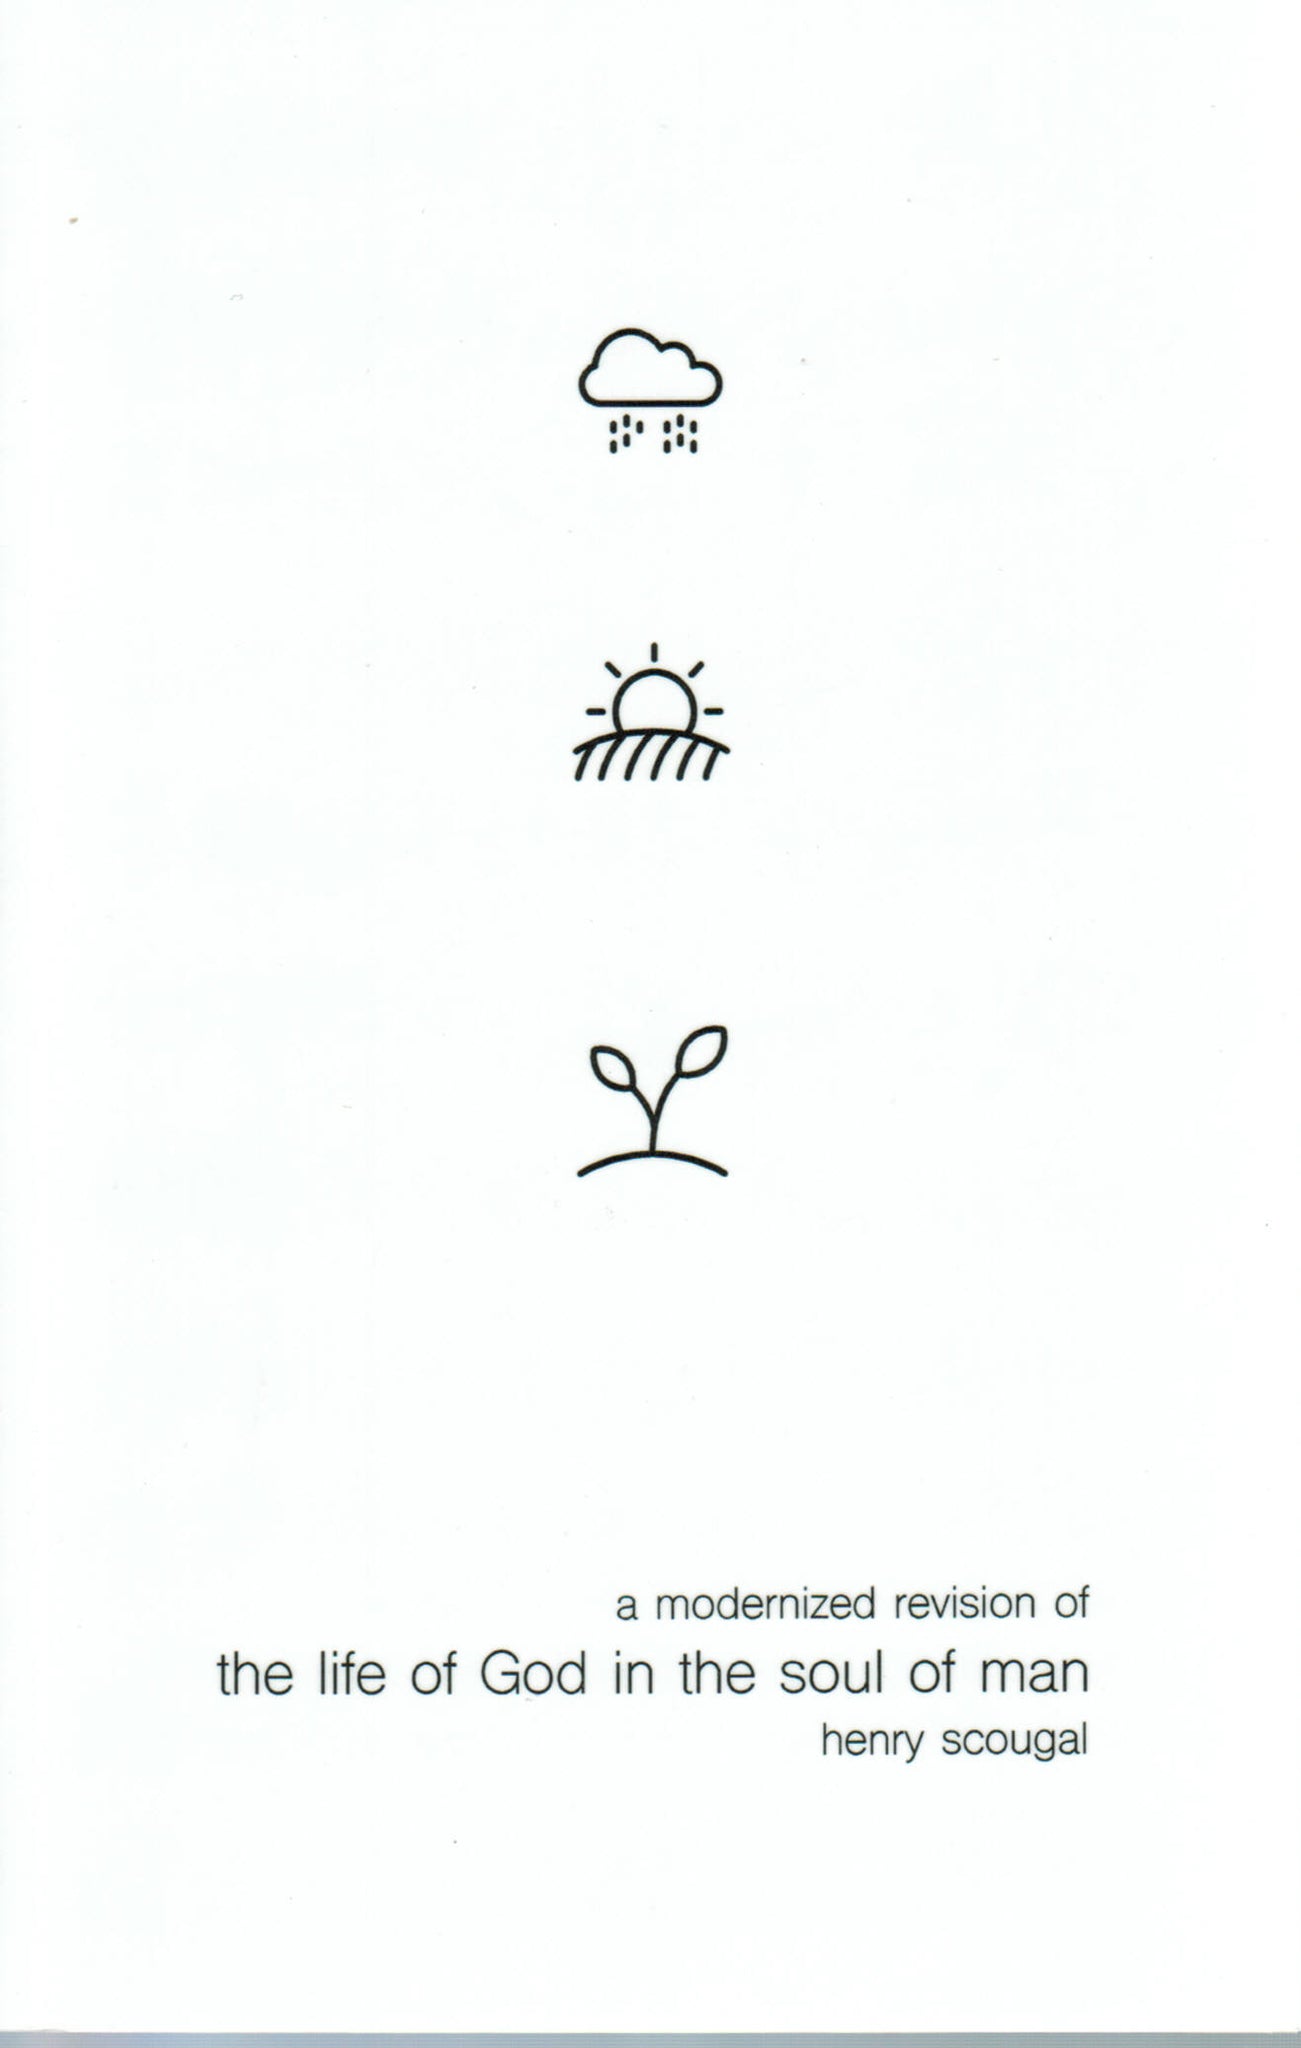 The Life of God in the Soul of Man: A Modernized Revision